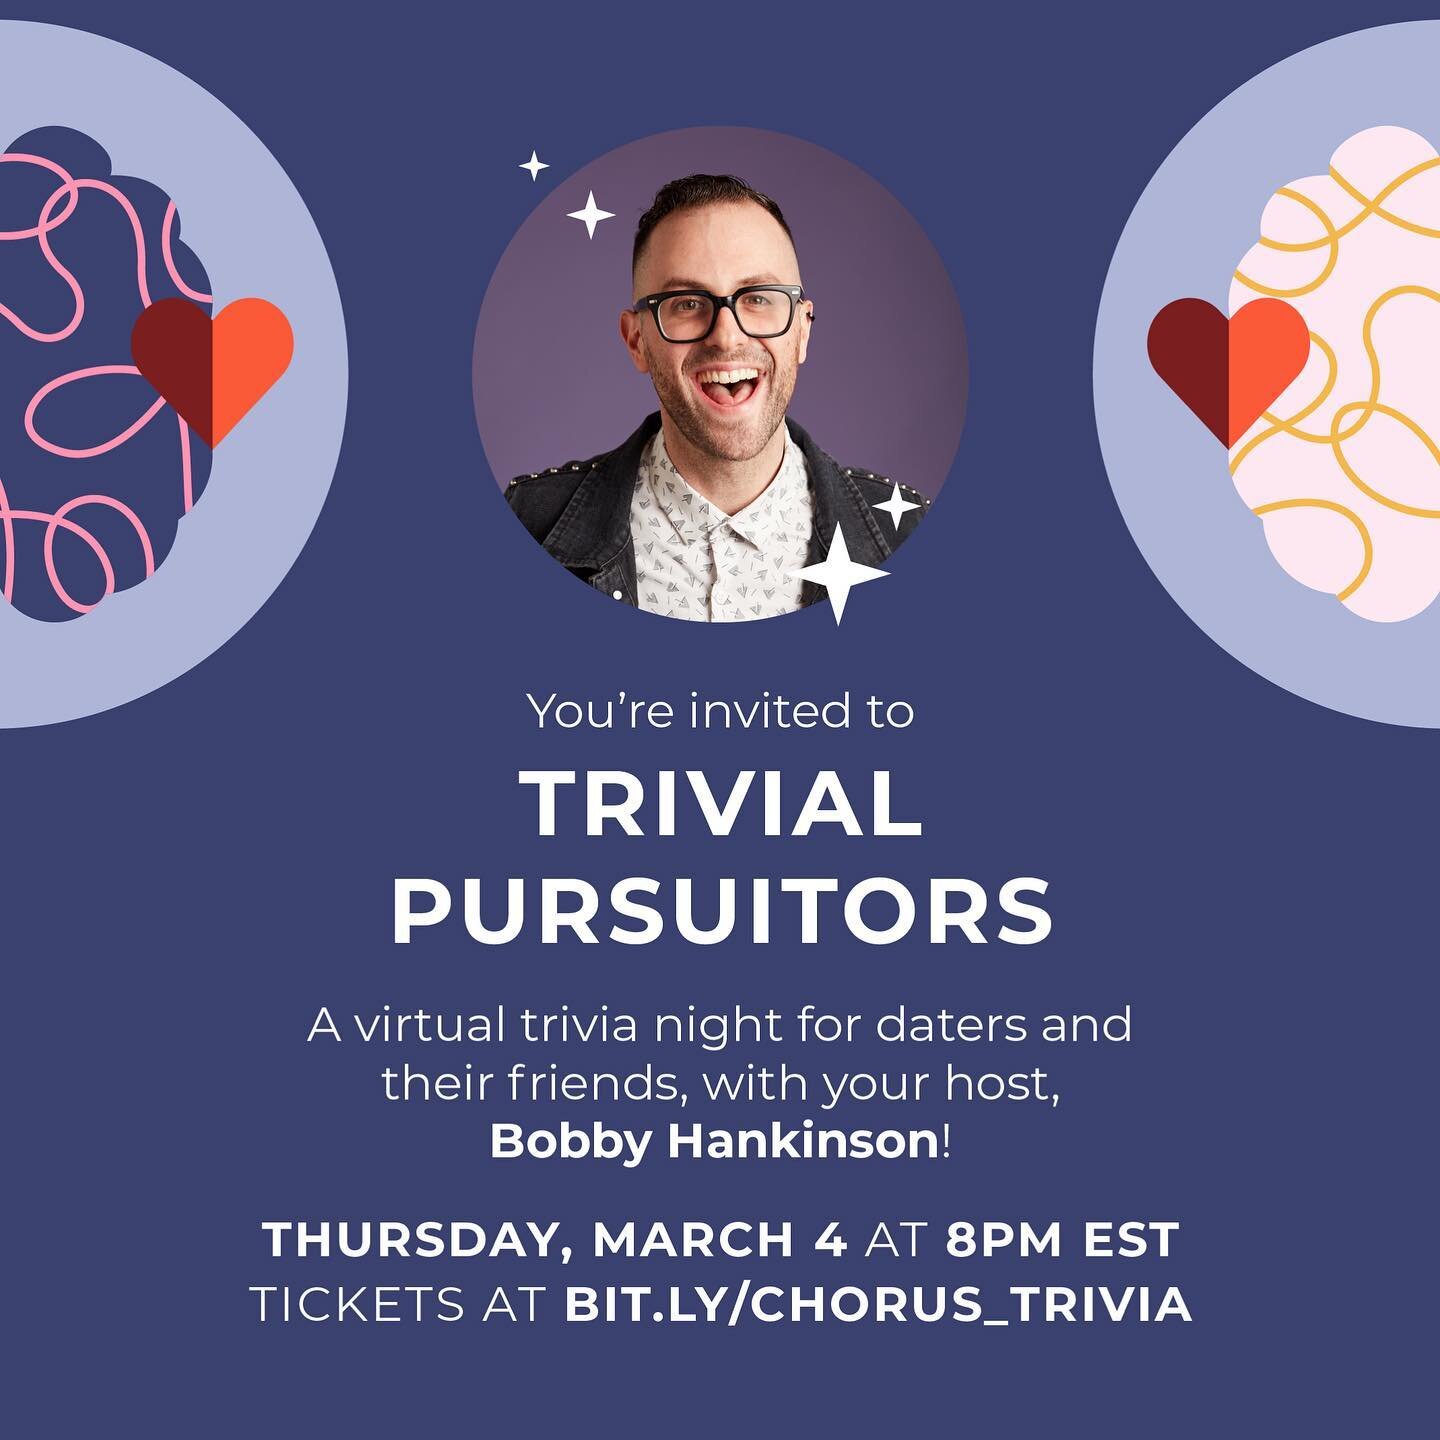 Tomorrow night! 8pm EST

The brilliant and effervescent @bobbyhank hosts our very first trivia night!

Now that you&rsquo;ve had months to rewatch your favorite rom-coms, come find your match in meaningless knowledge and maybe something more...?

Bri